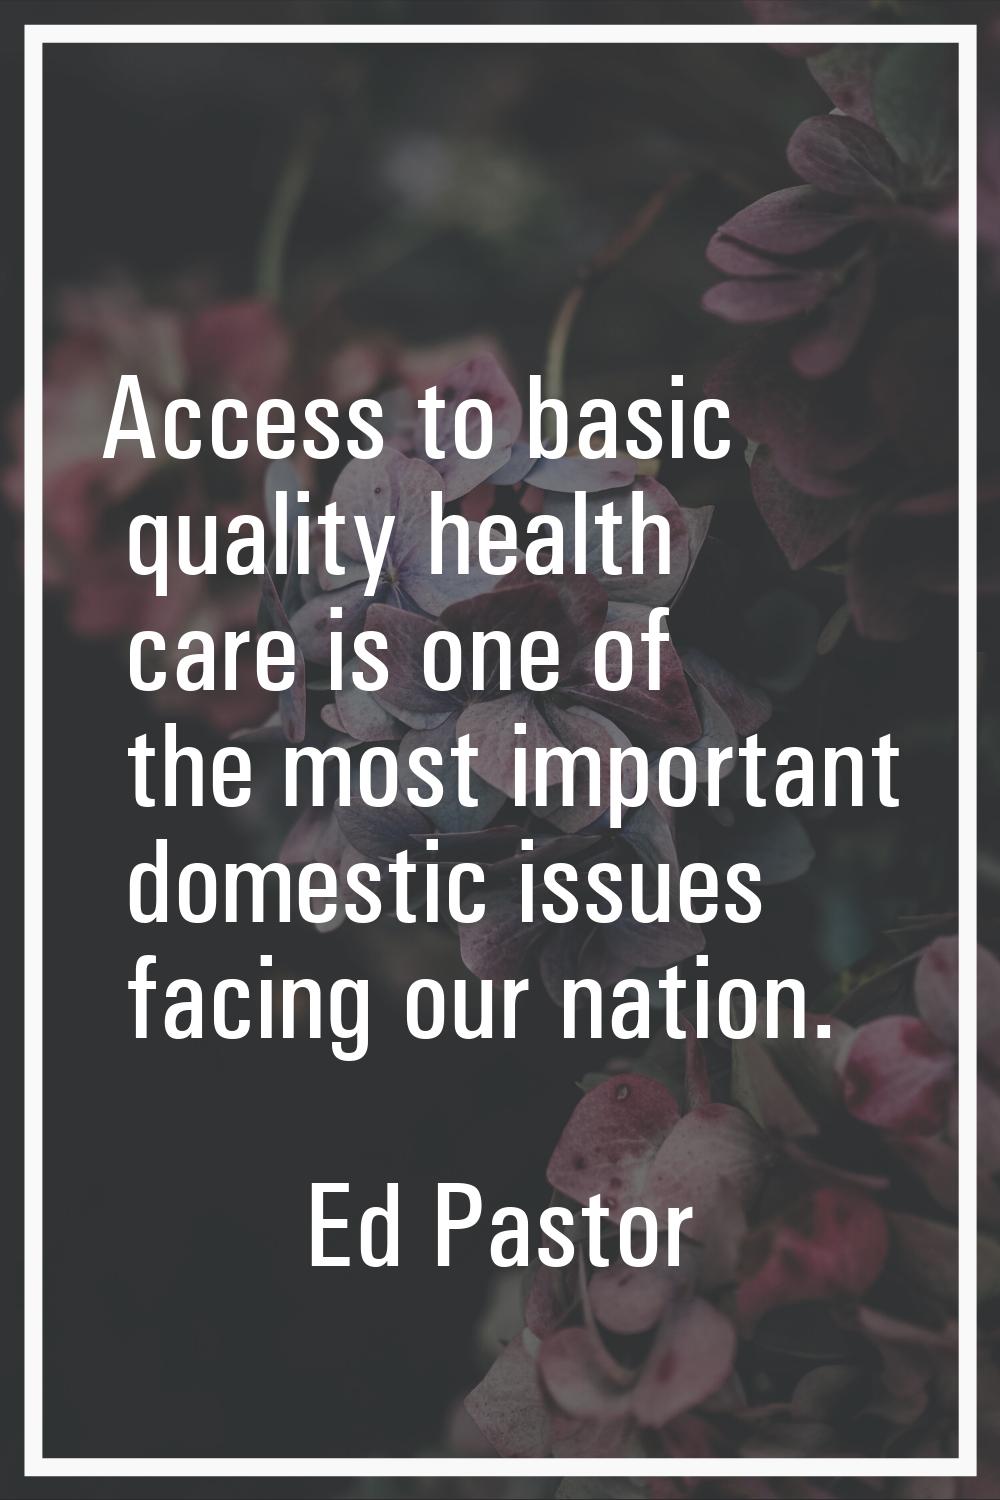 Access to basic quality health care is one of the most important domestic issues facing our nation.